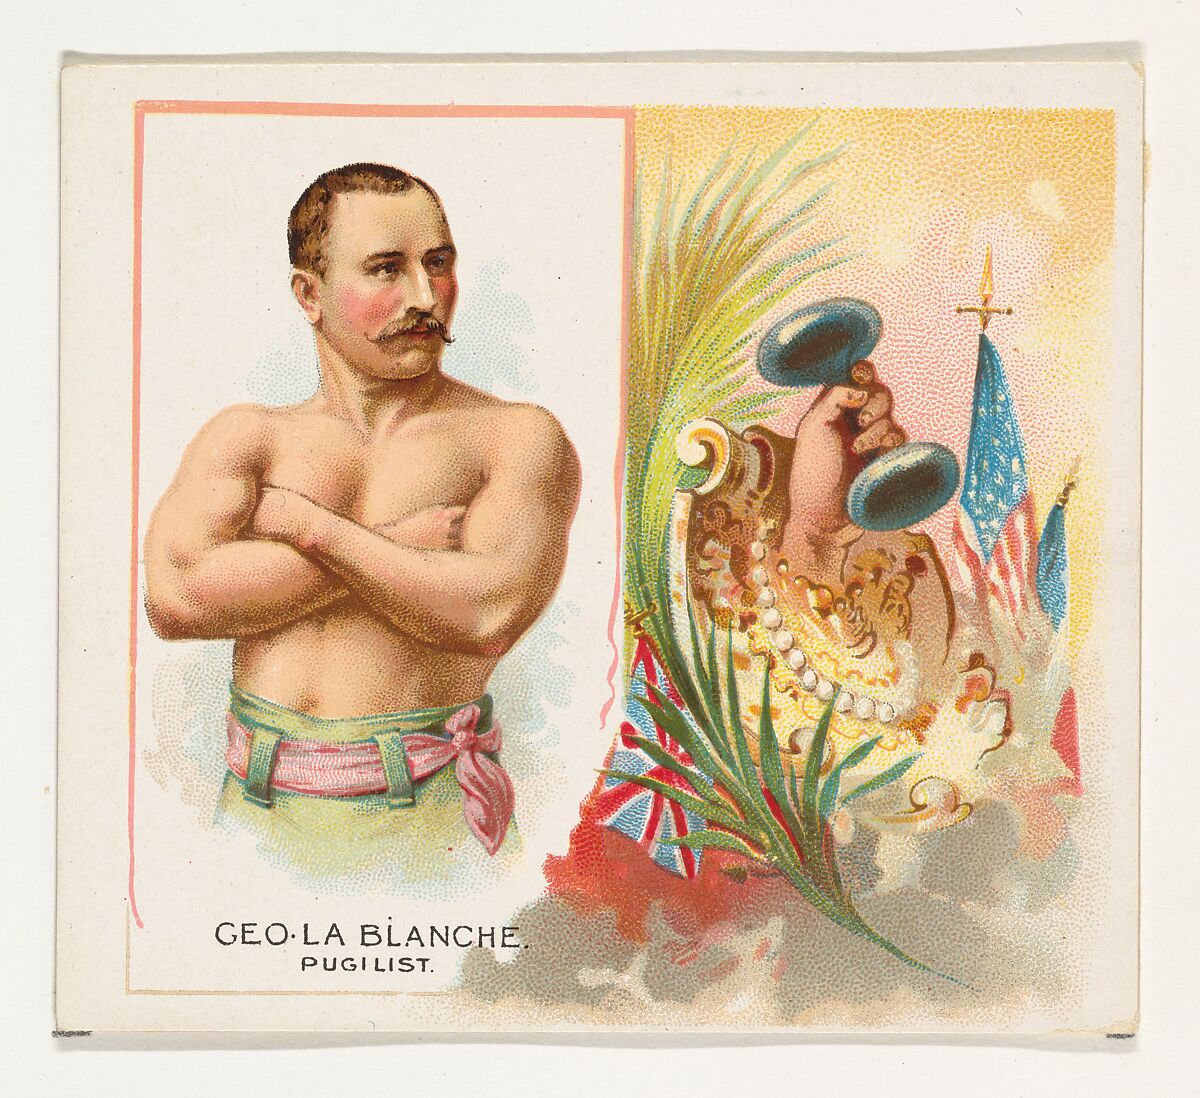 George La Blanche, Pugilist, from World's Champions, Second Series (N43) for Allen & Ginter Cigarettes, Allen &amp; Ginter (American, Richmond, Virginia), Commercial lithograph 